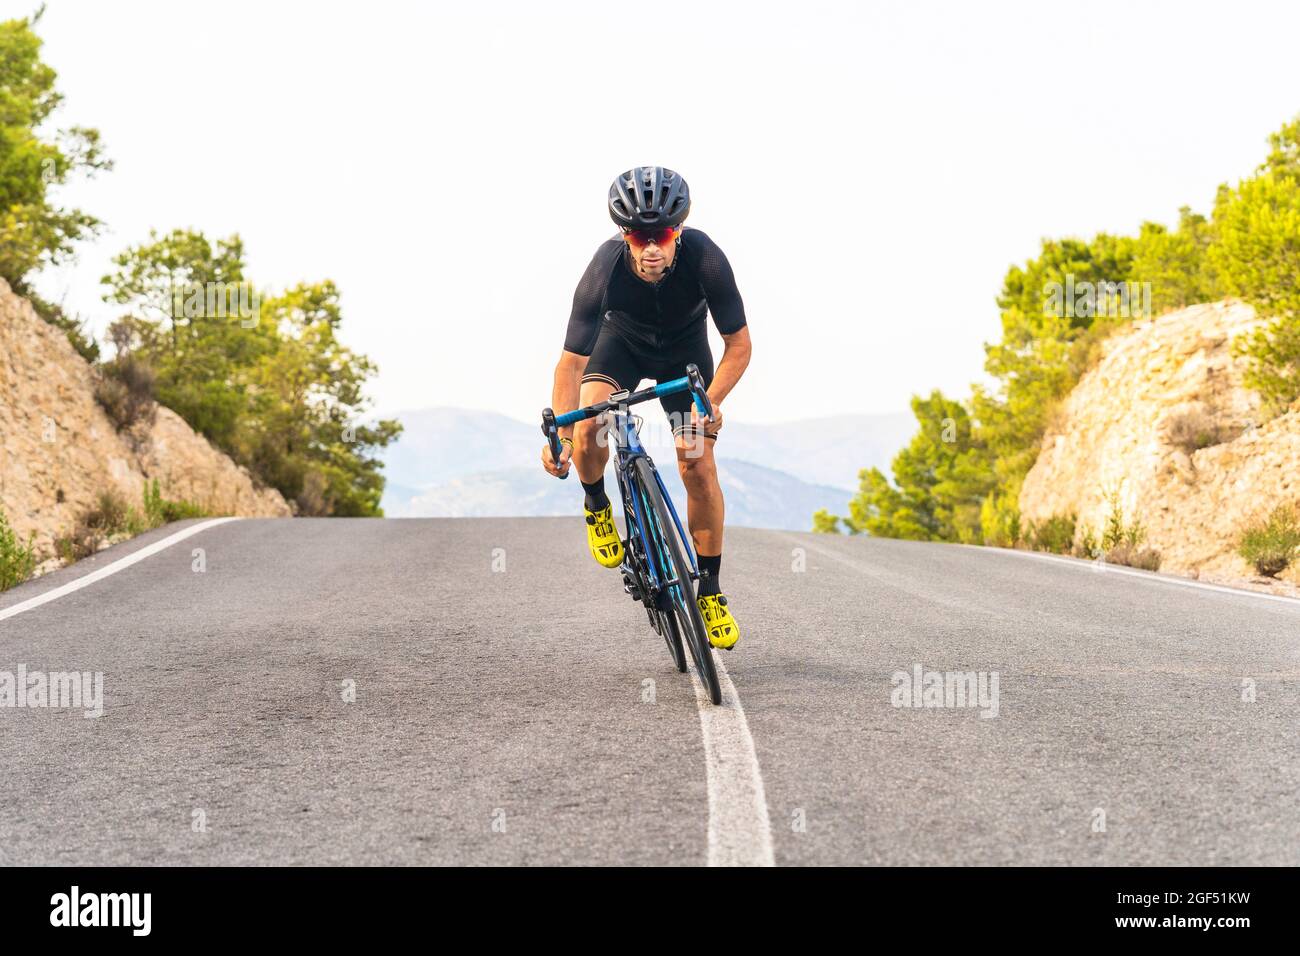 Male sportsperson cycling on road Stock Photo